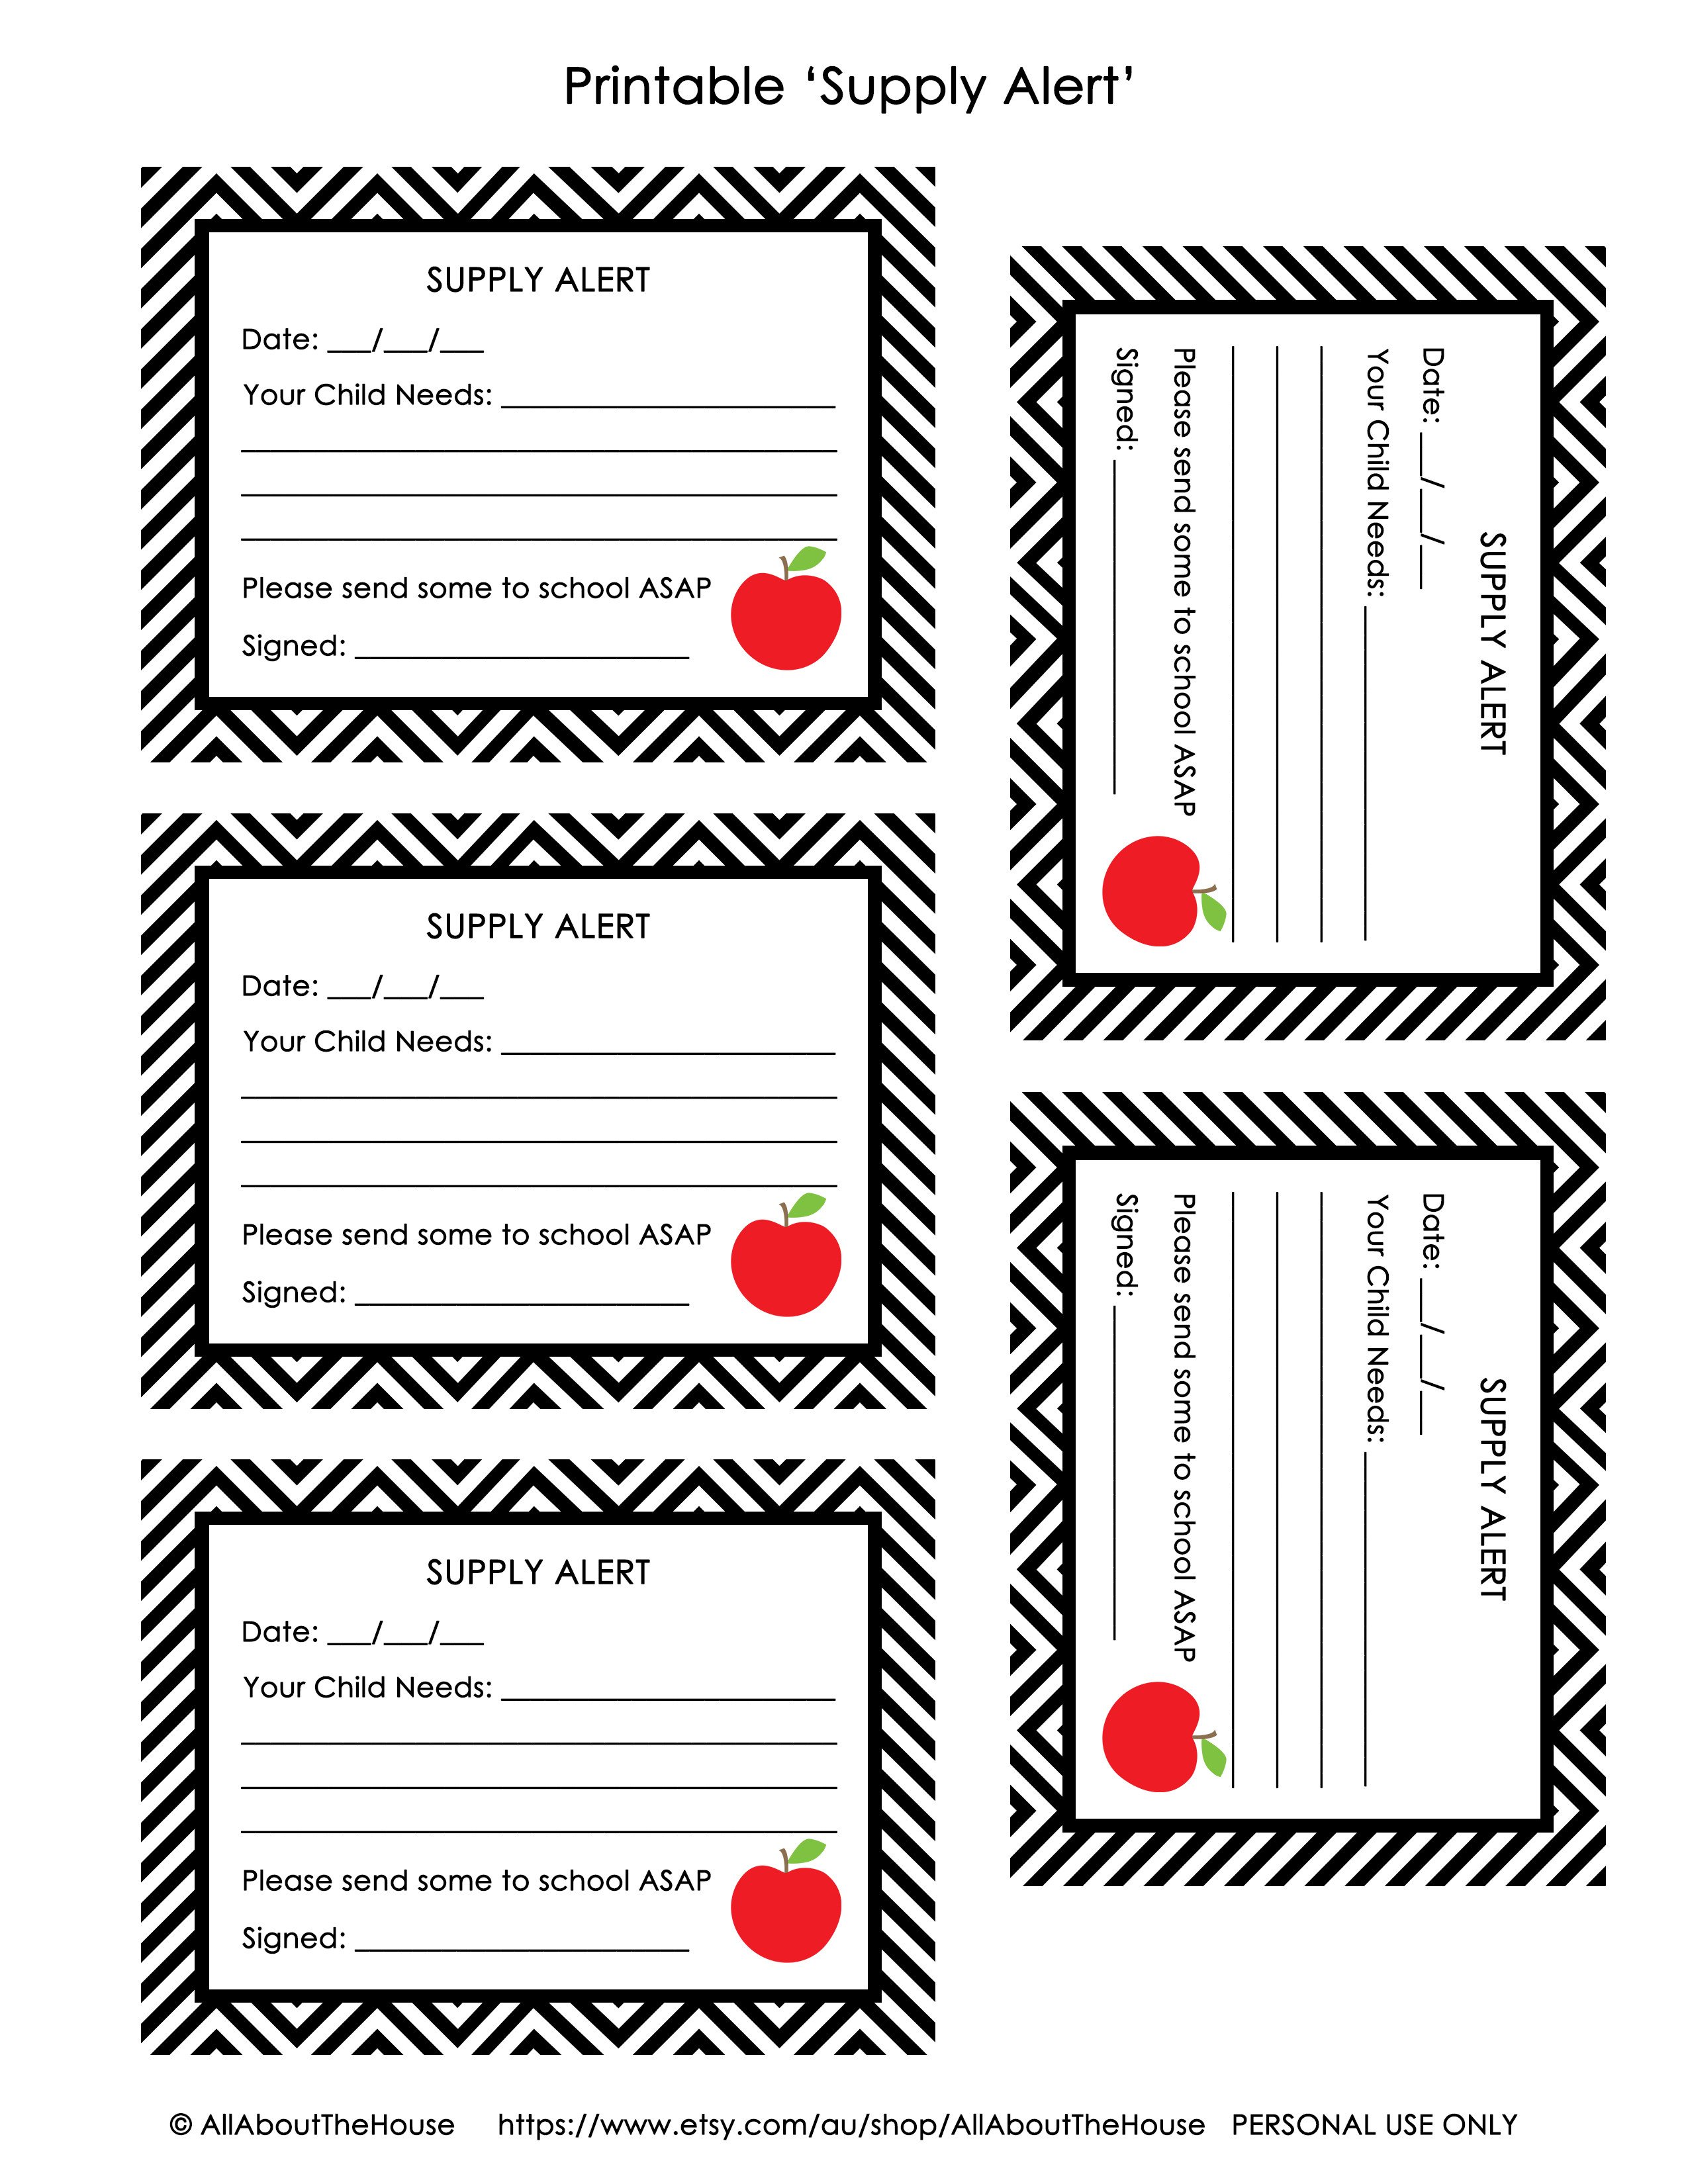 Pass Down Log Template Free Printable Hall Pass and Supply Alert Cards